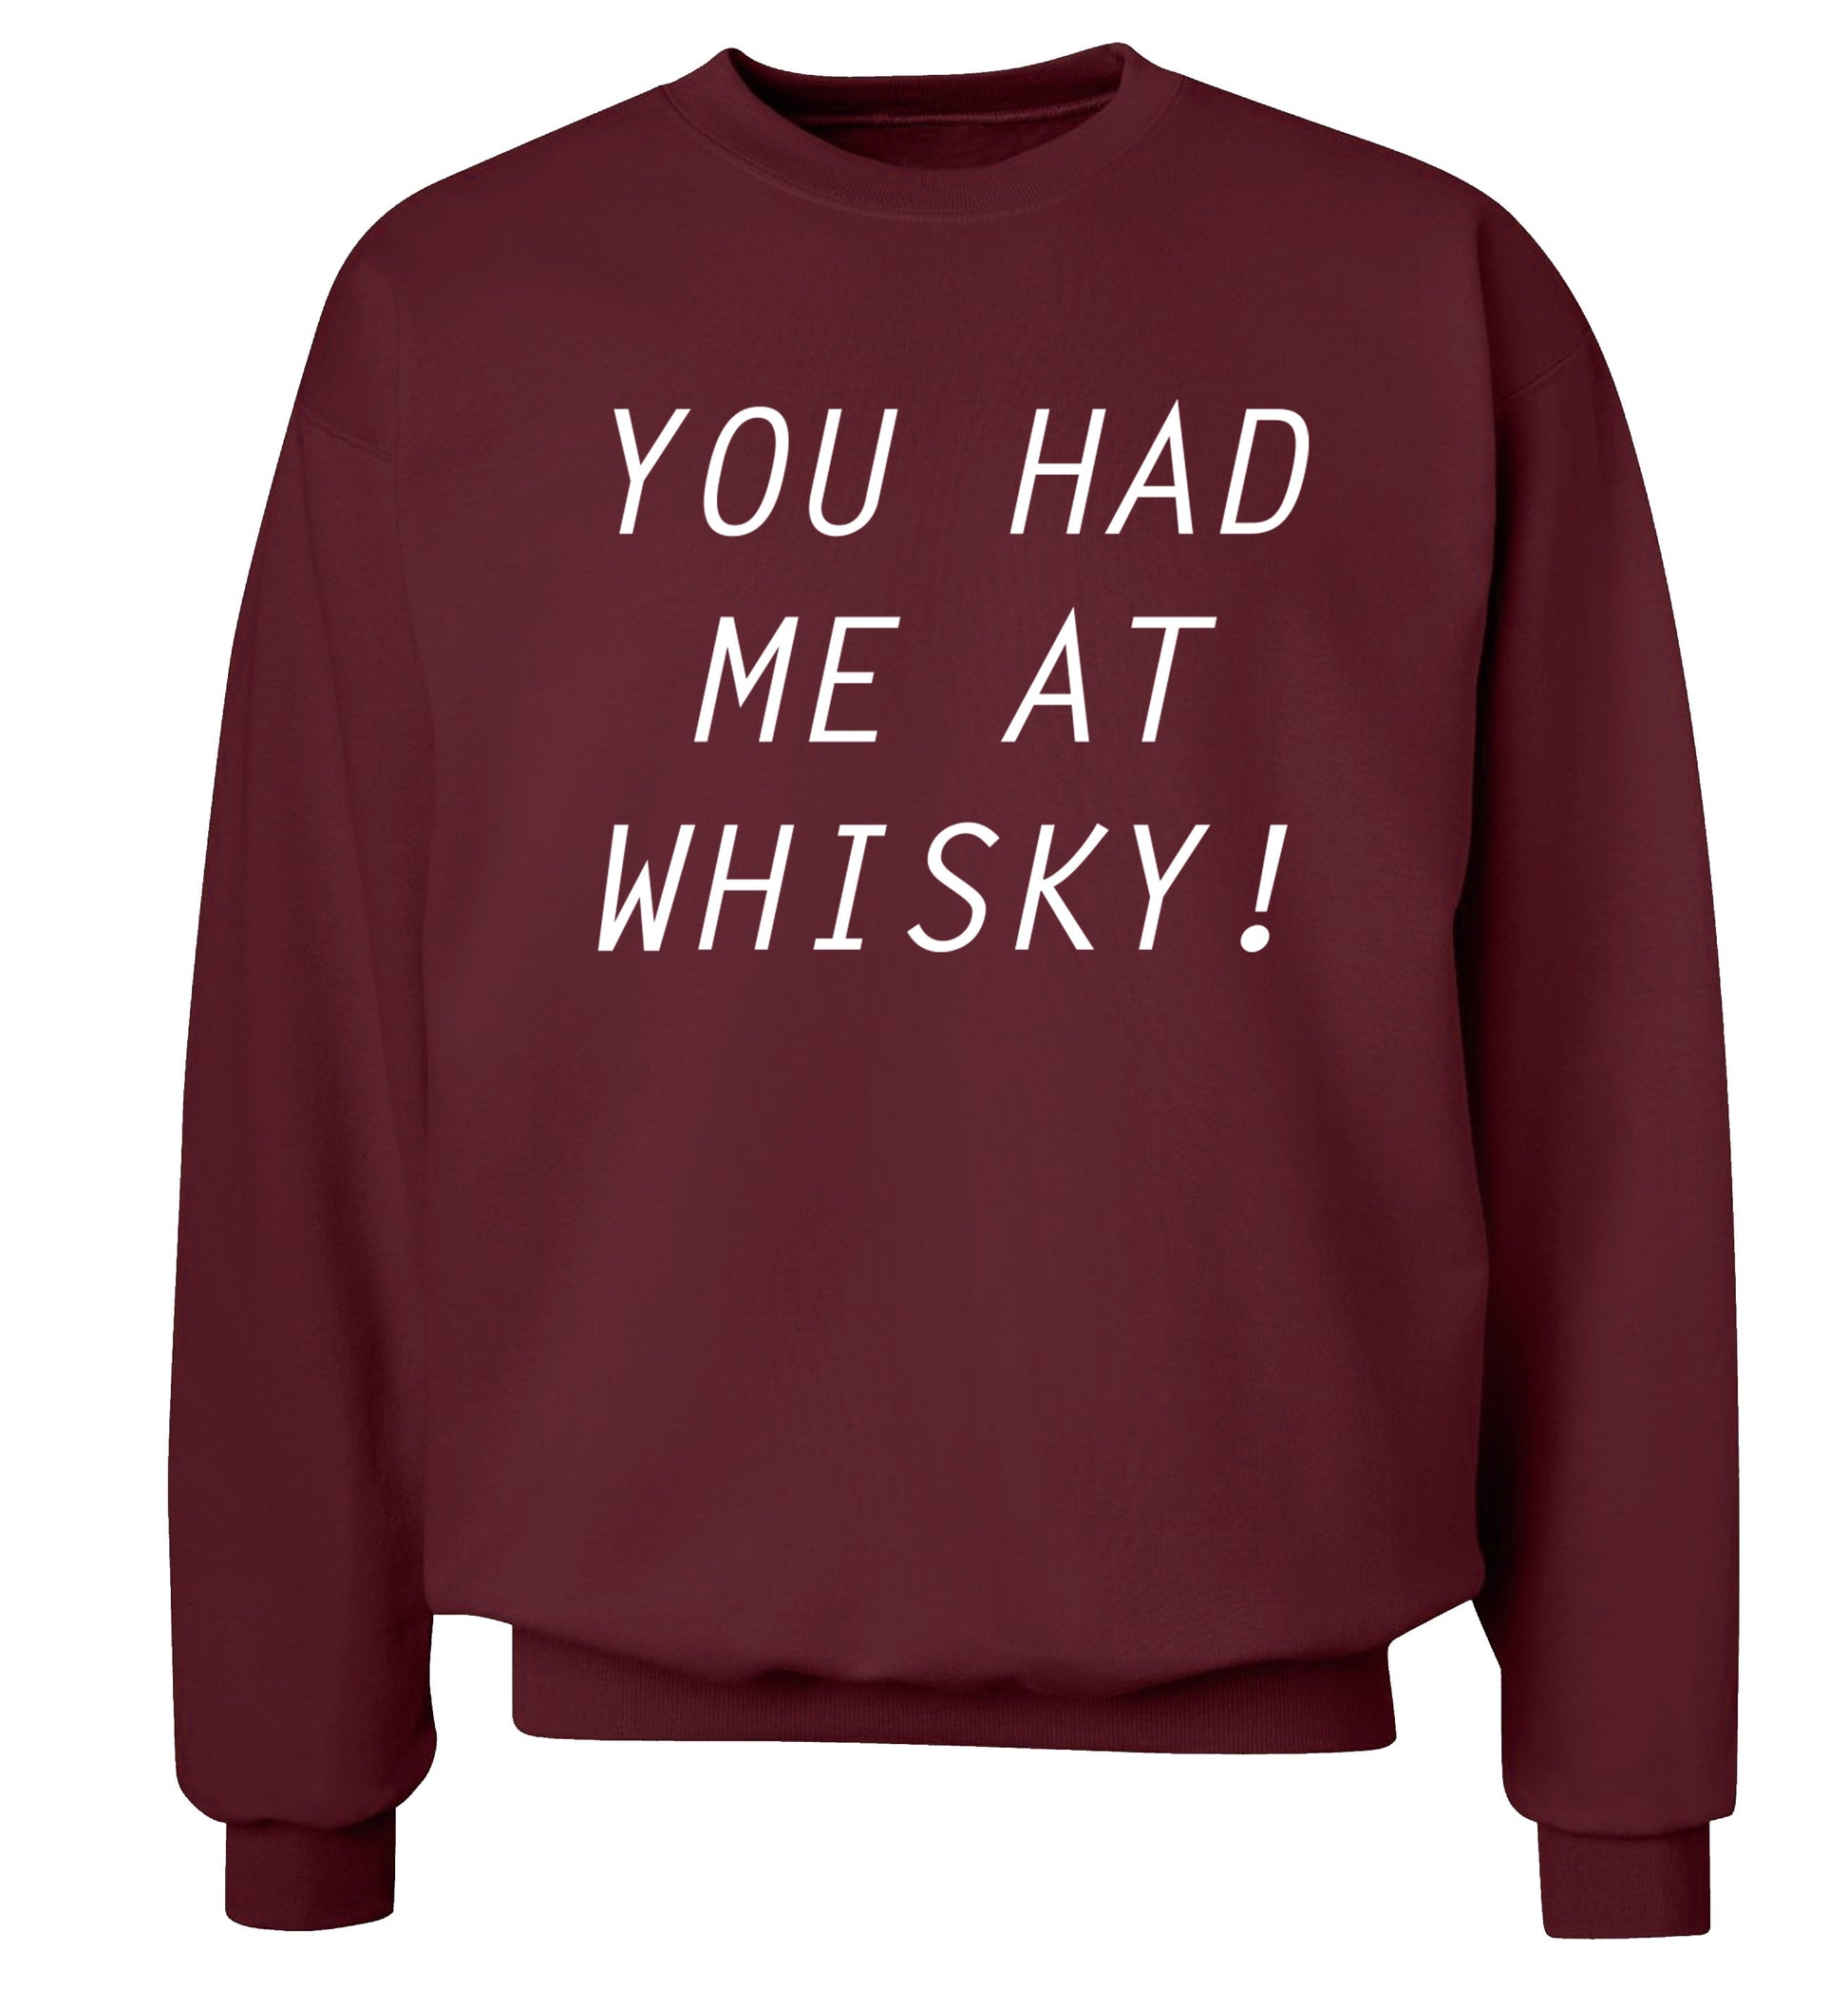 You had me at whisky Adult's unisex maroon Sweater 2XL